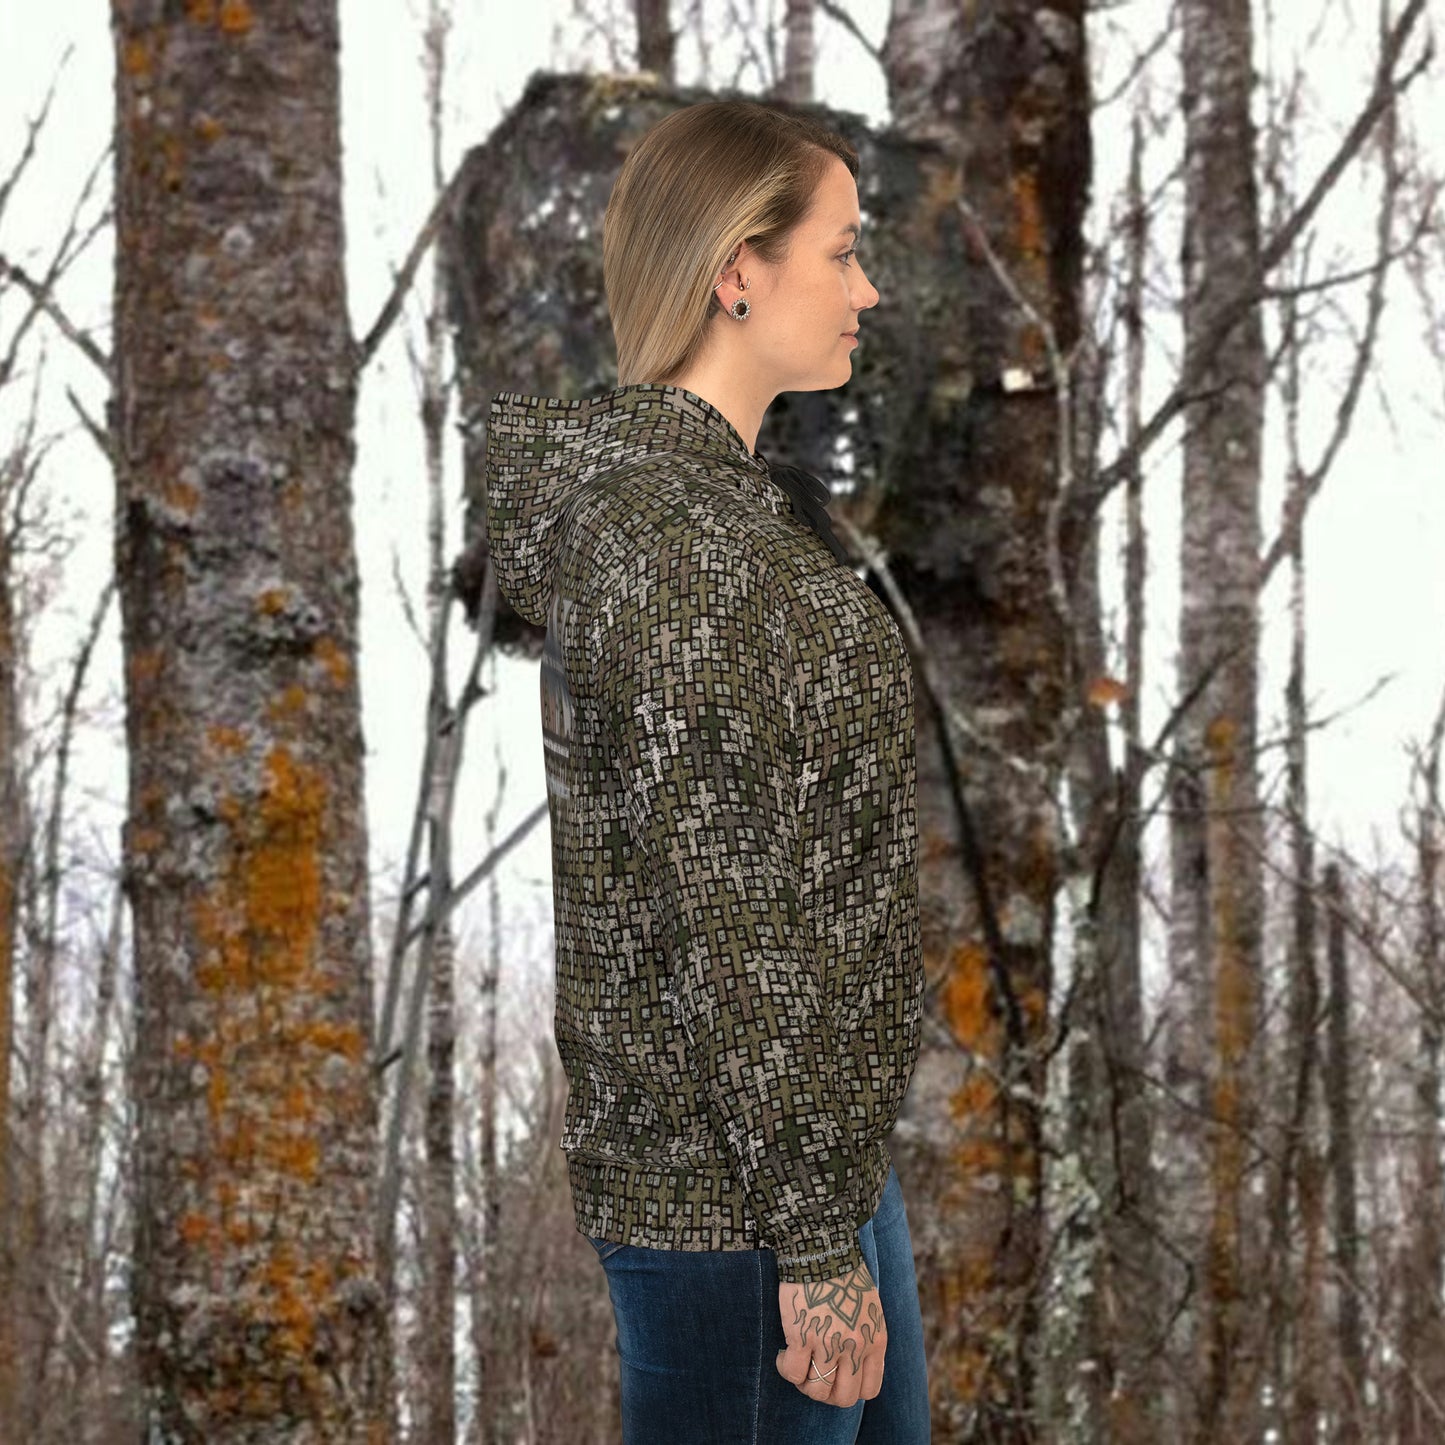 Wandering the Wilderness Hardscrabble camo unisex performance fabric Athletic Hoodie. These tend to run small so order one size larger than you normally wear, also these are made to order and could take two weeks or longer to be delivered.